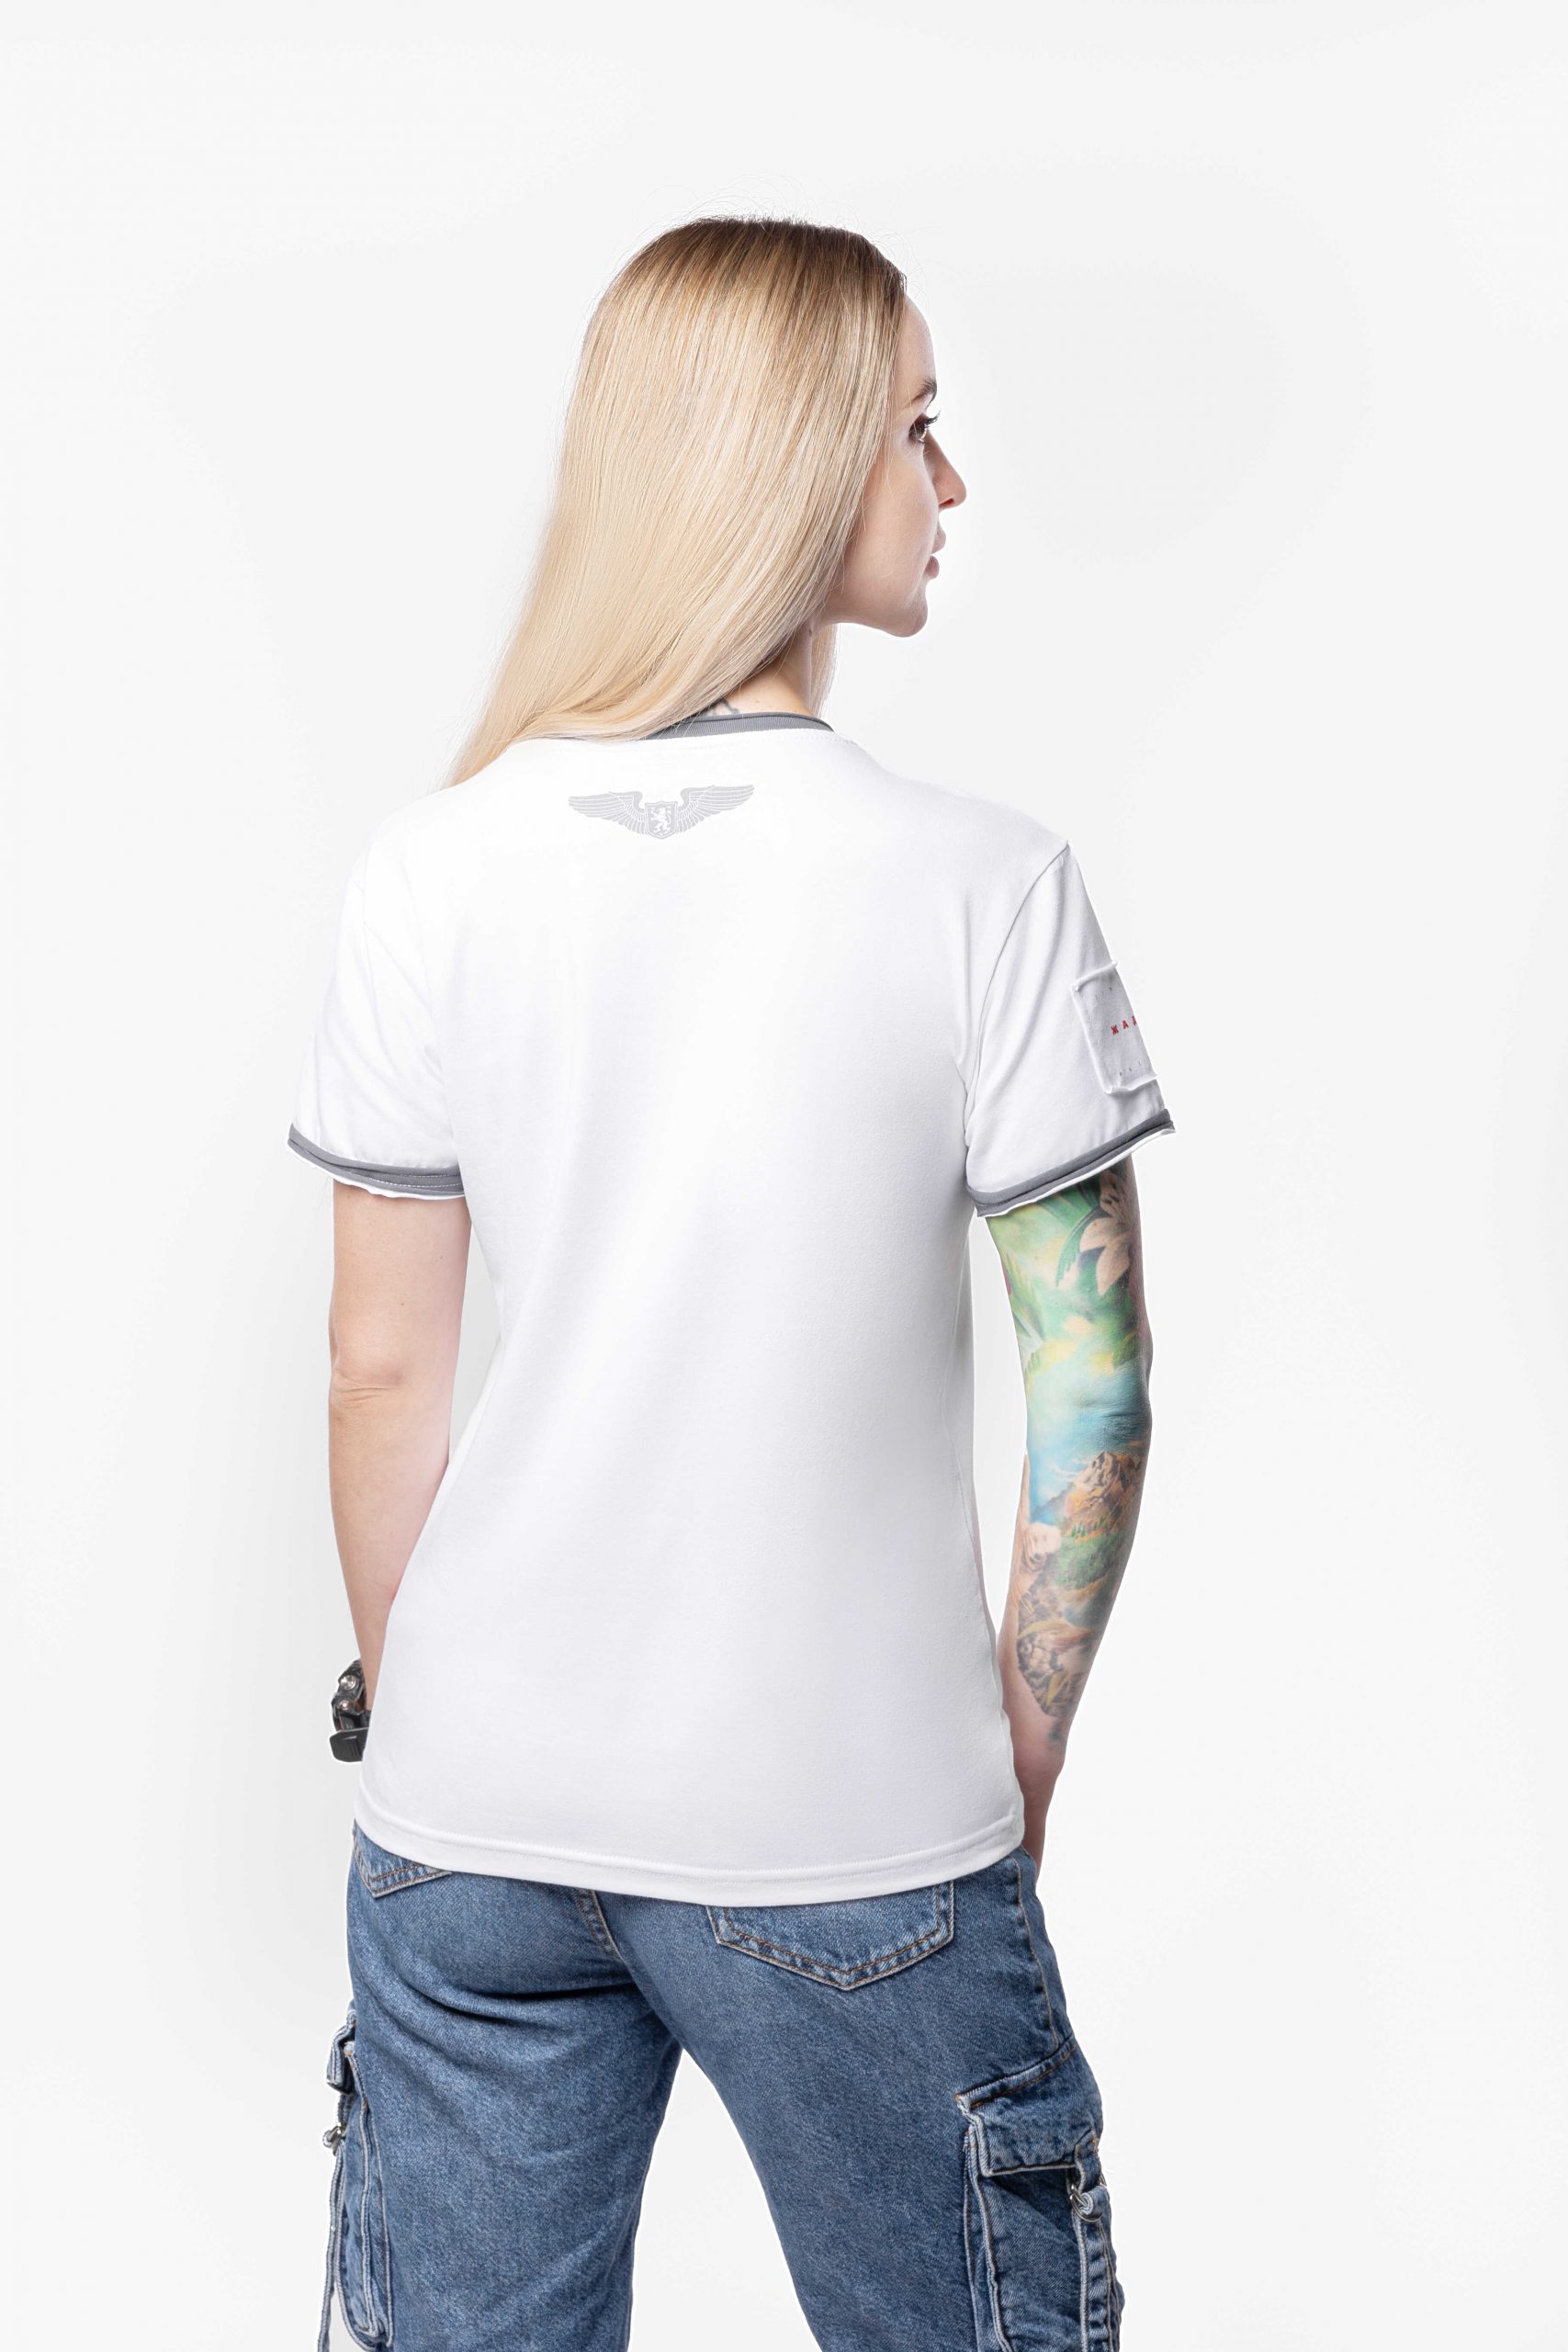 Women's T-Shirt Culture And Weapons. Color white. 1.